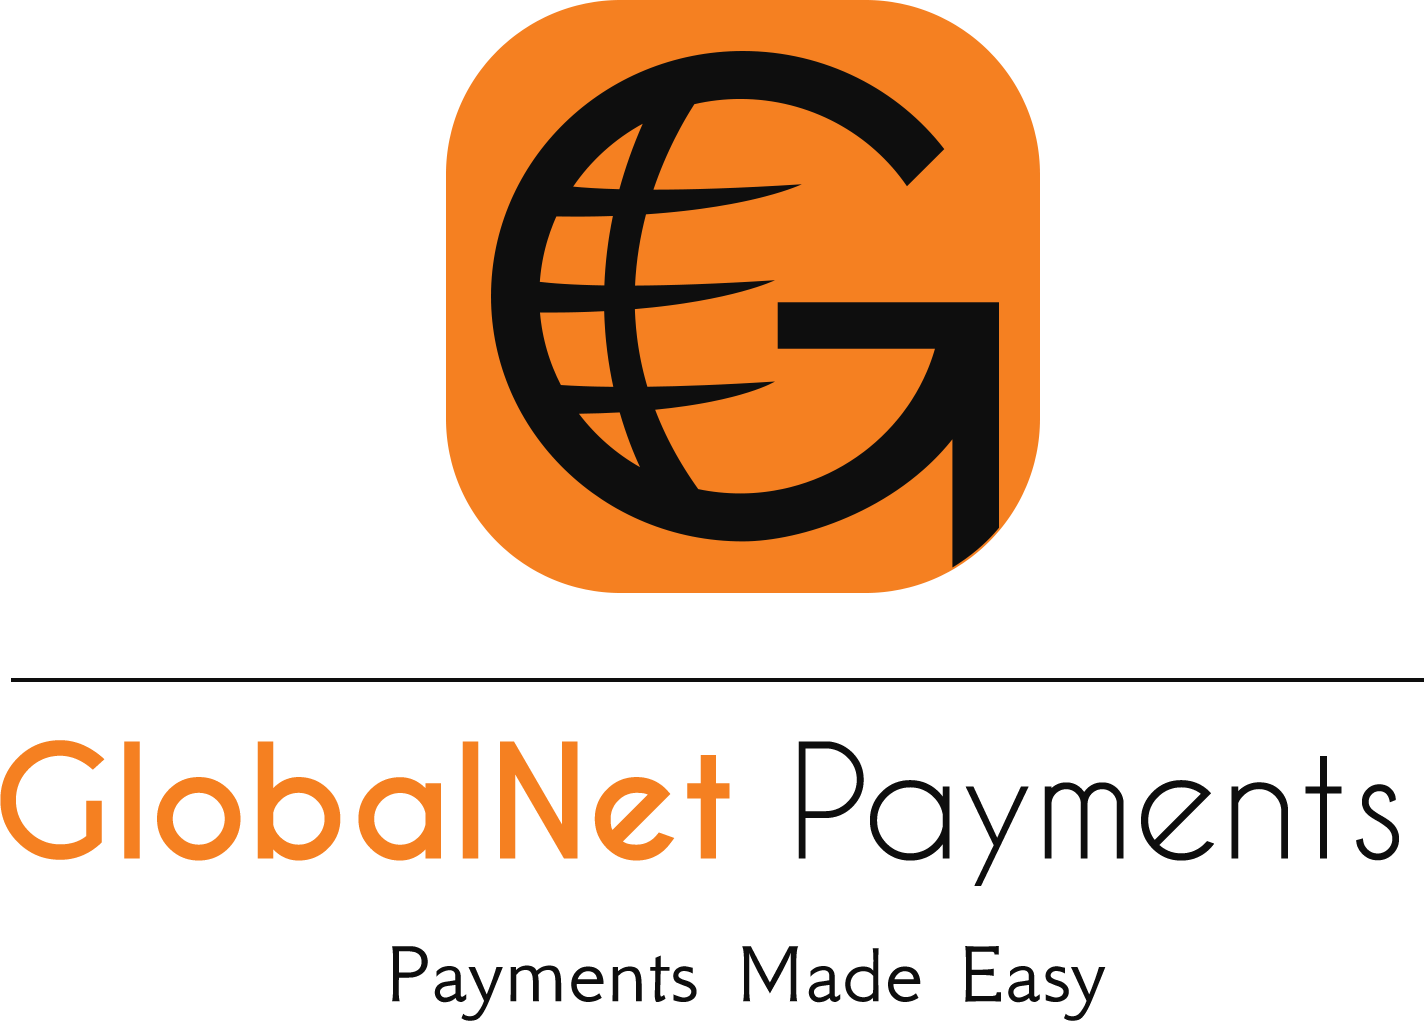 GlobalNet Payments